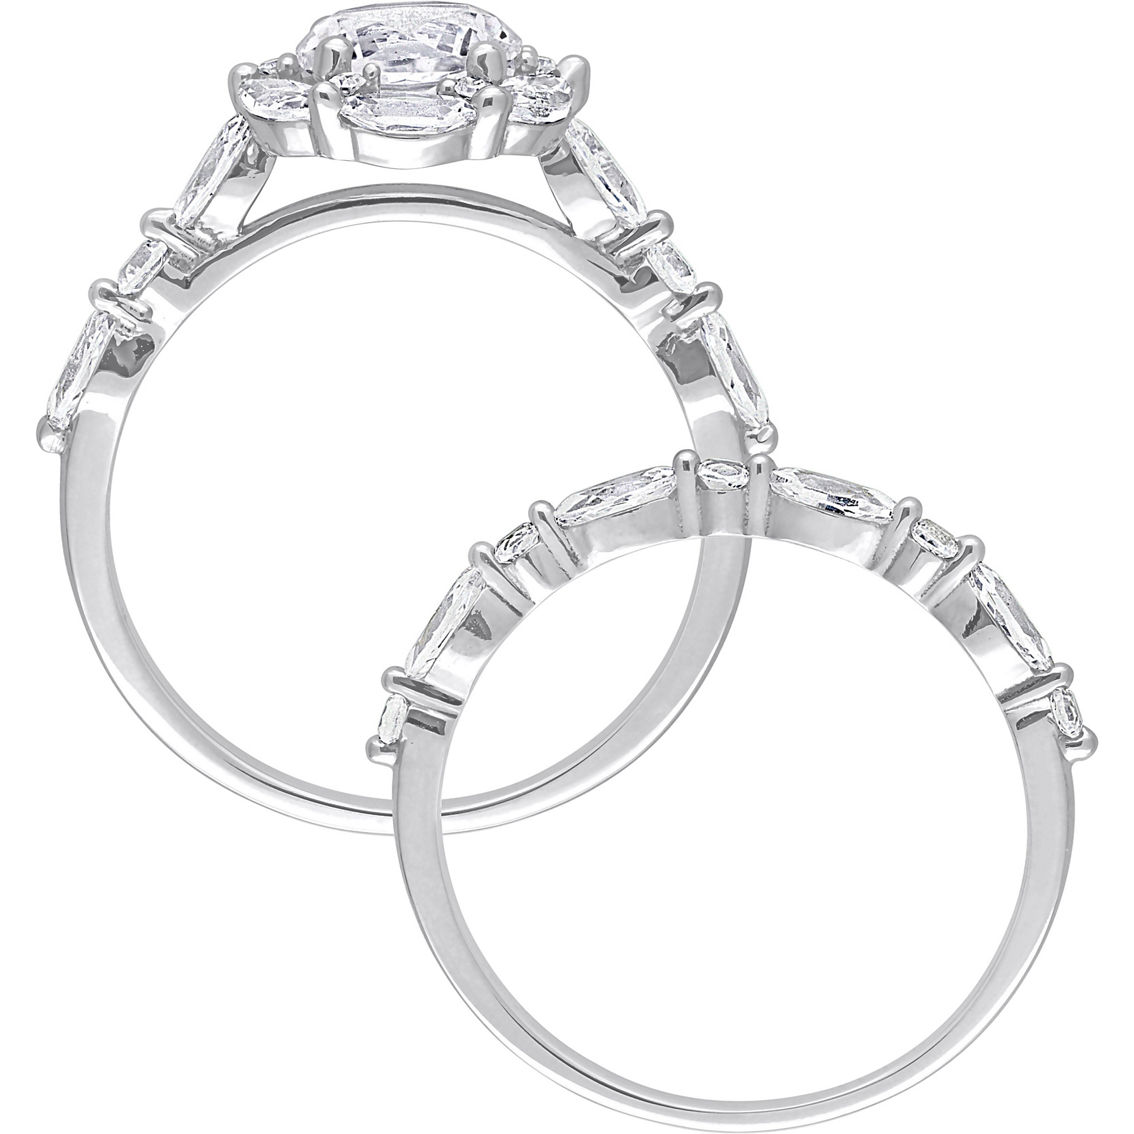 10K White Gold Created White Sapphire and Diamond Halo Floral Bridal Ring Set - Image 3 of 6